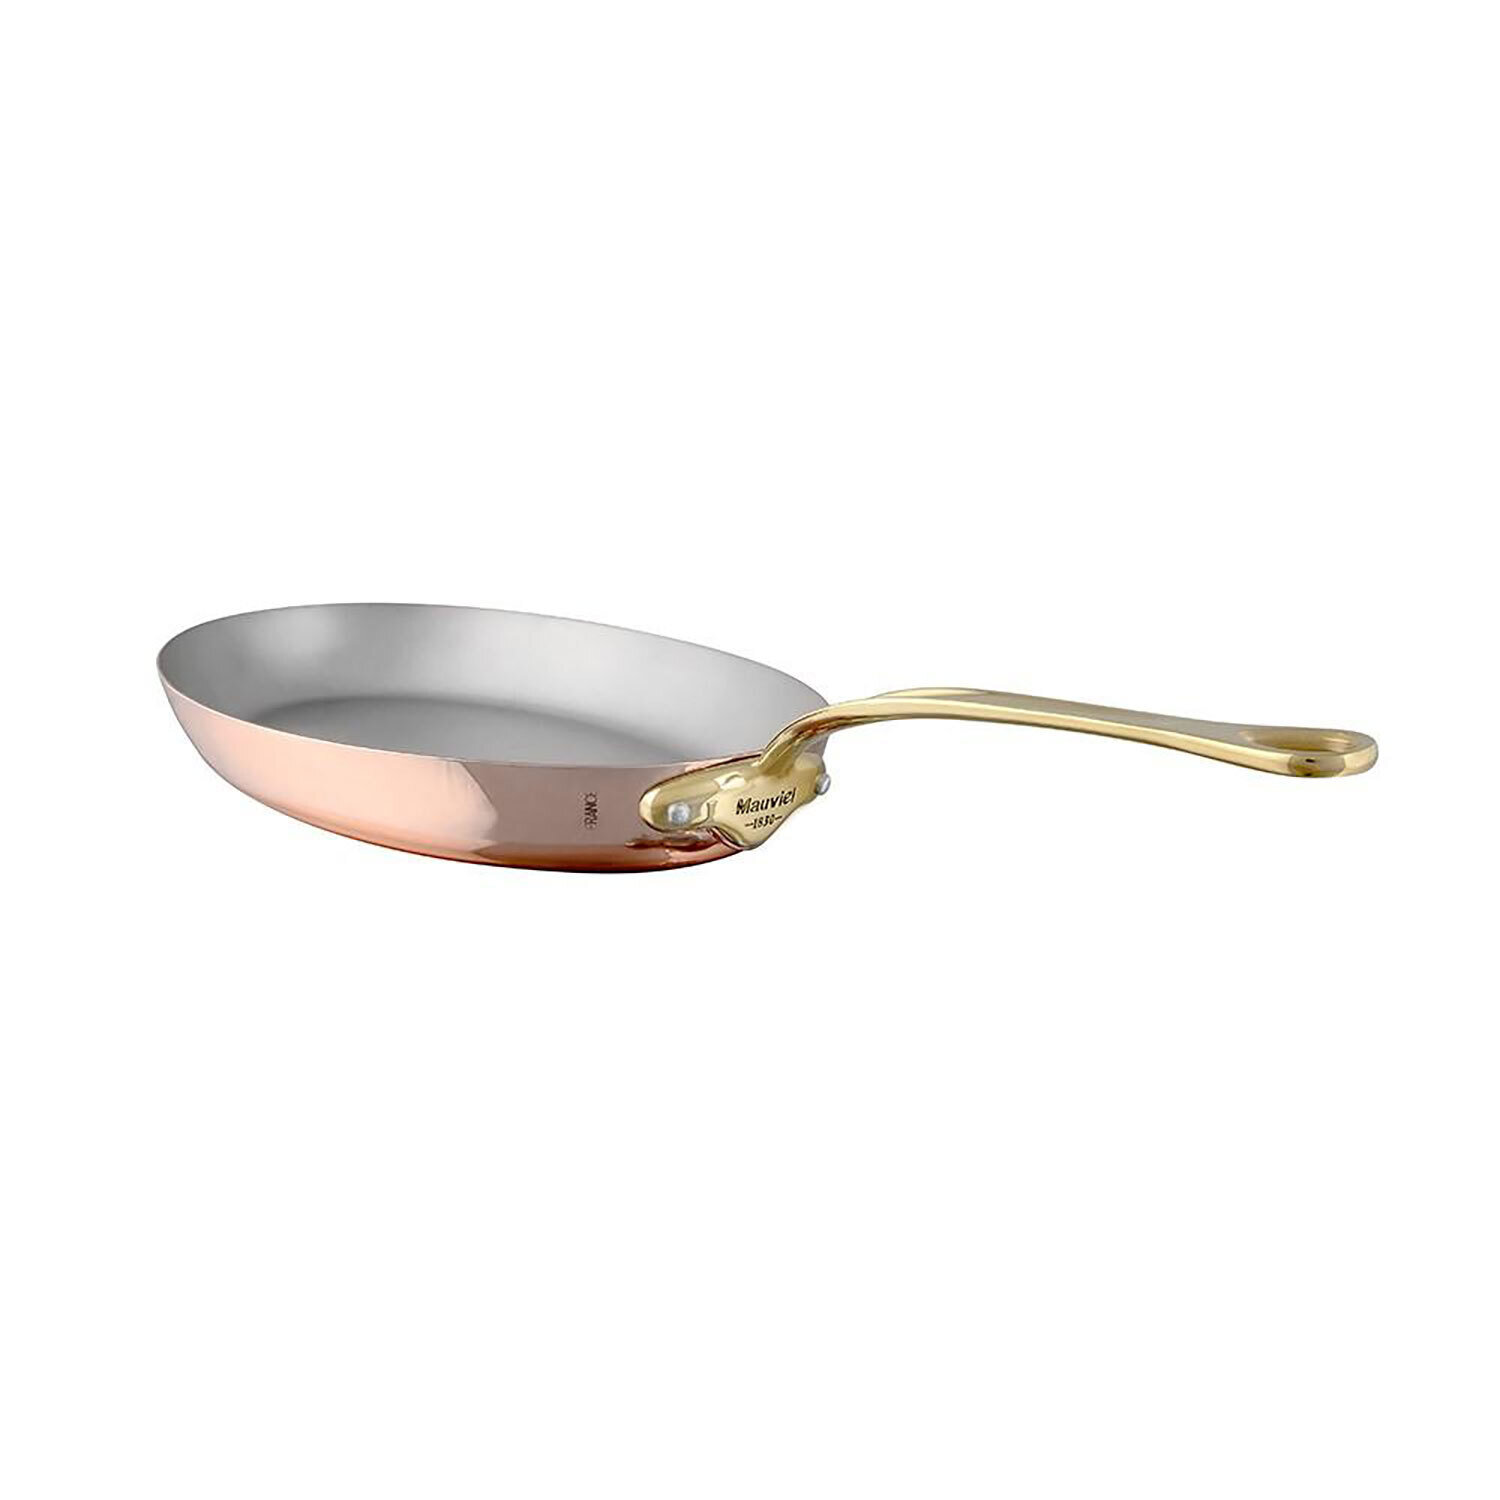 Mauviel M'HERITAGE 150B Oval Frying Pan 11.8 x 8 Inch 672530